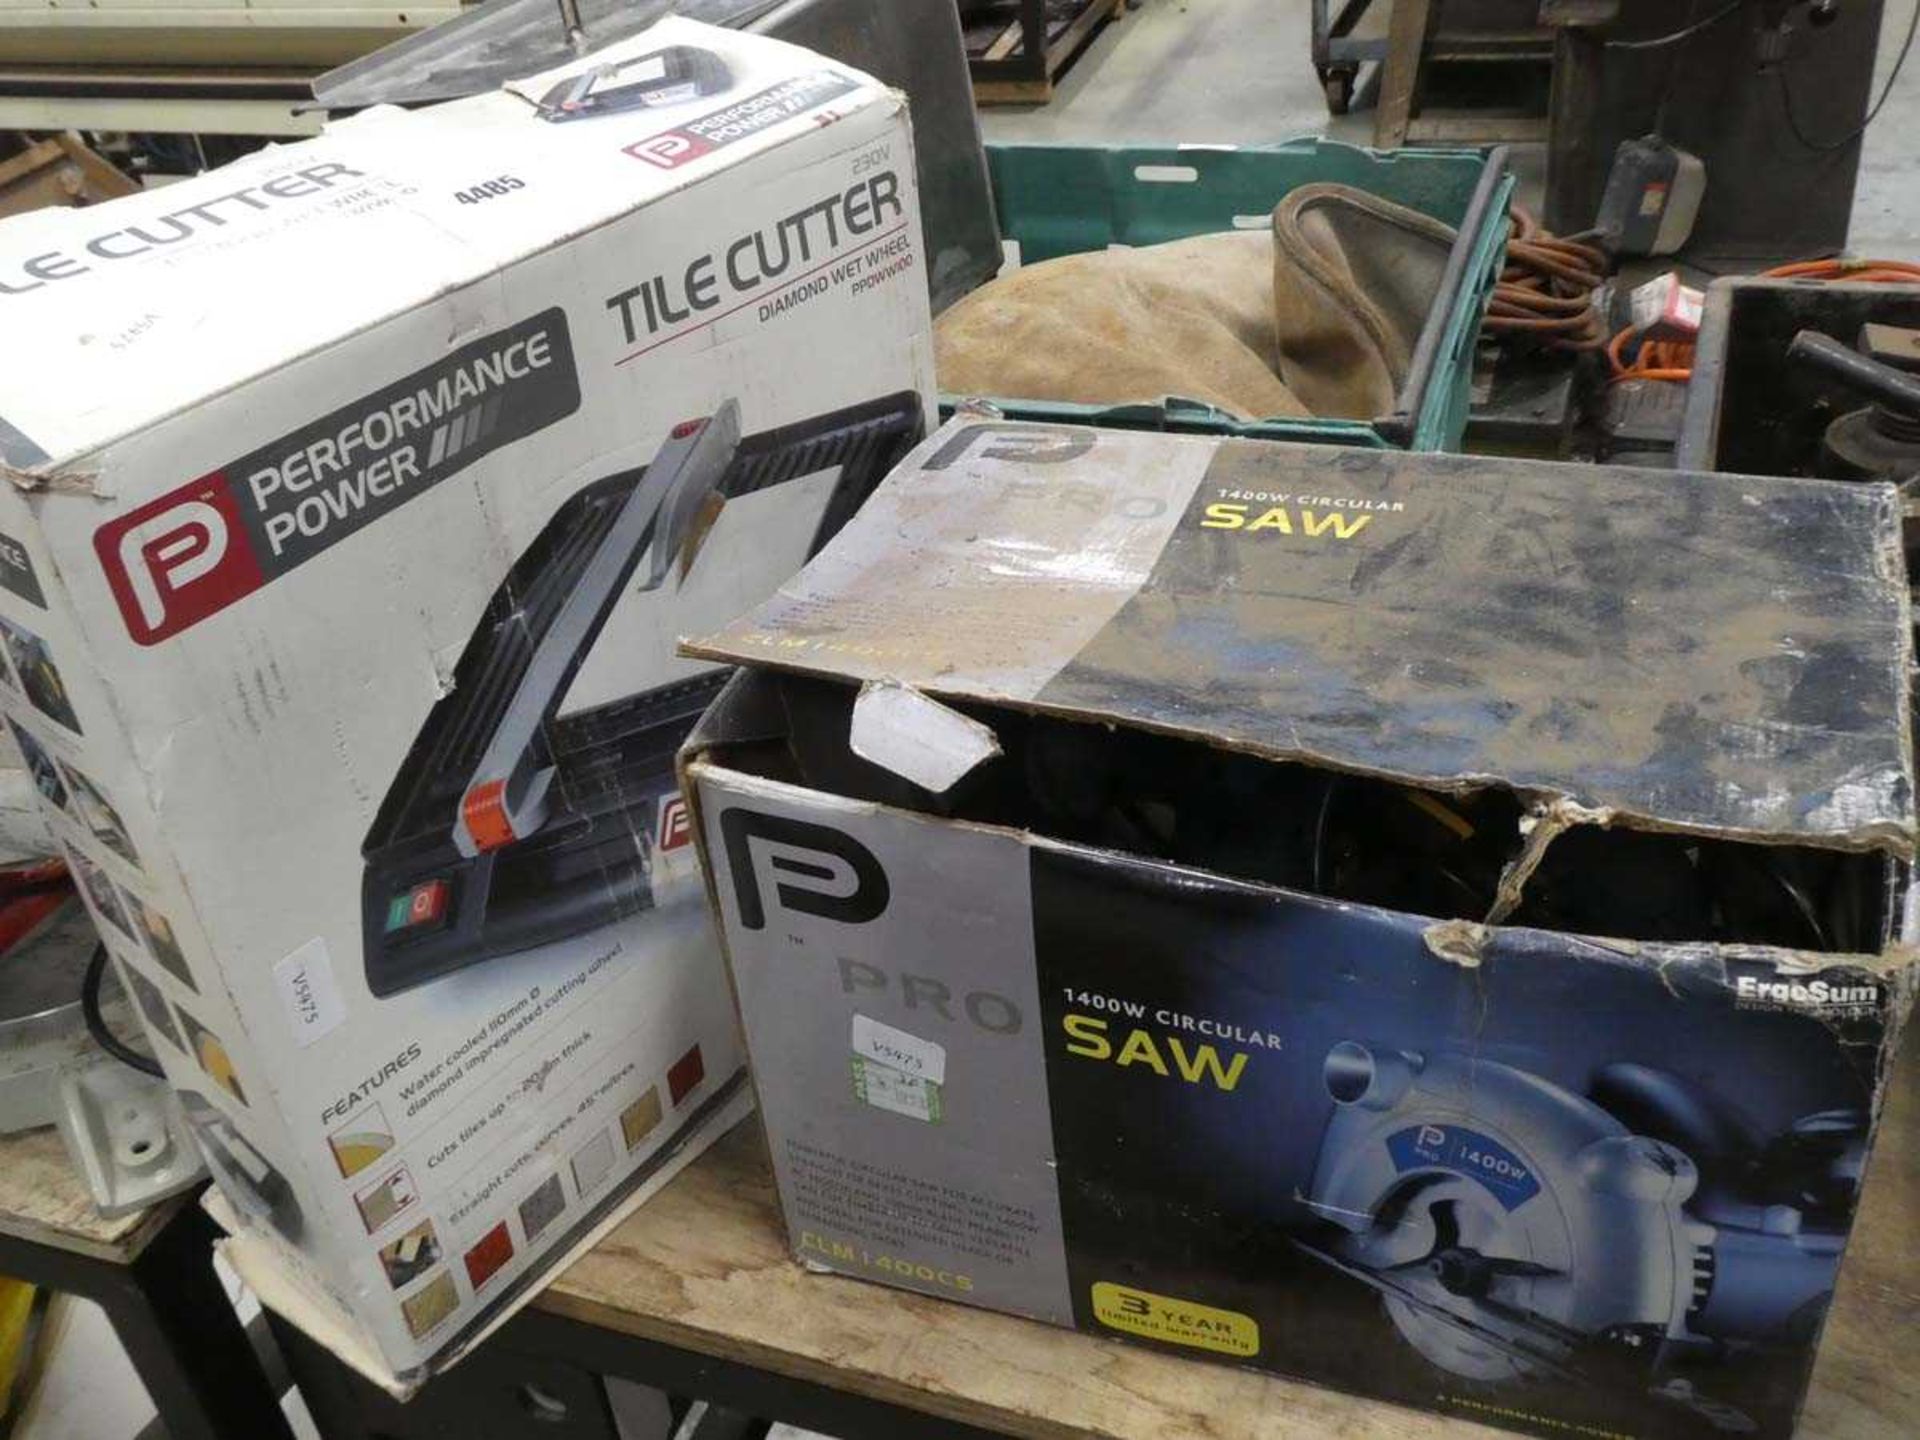 Power performance tile cutter and a circular saw